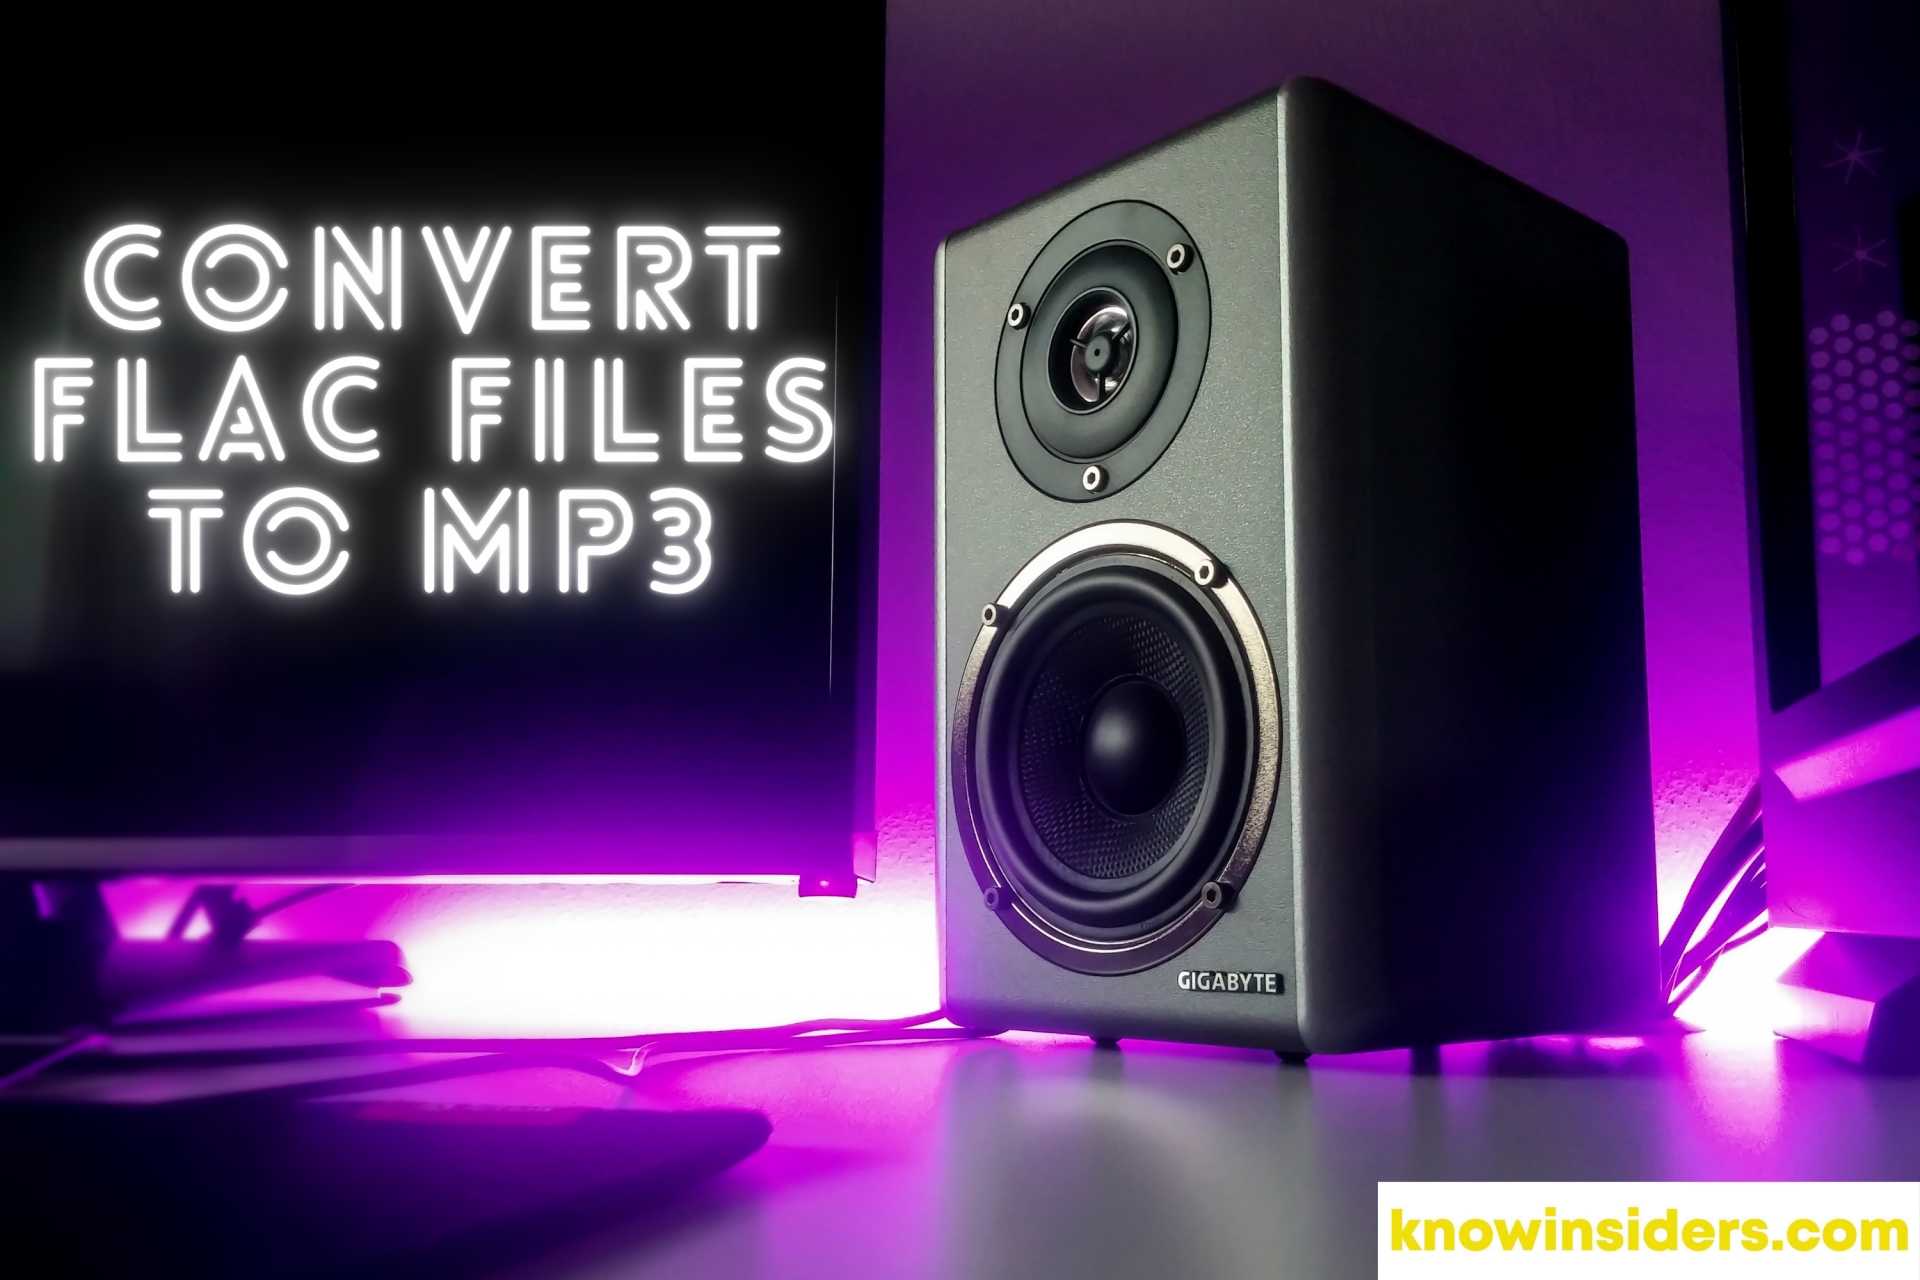 How to Convert FLAC Files to MP3: Step-by-Step Guide